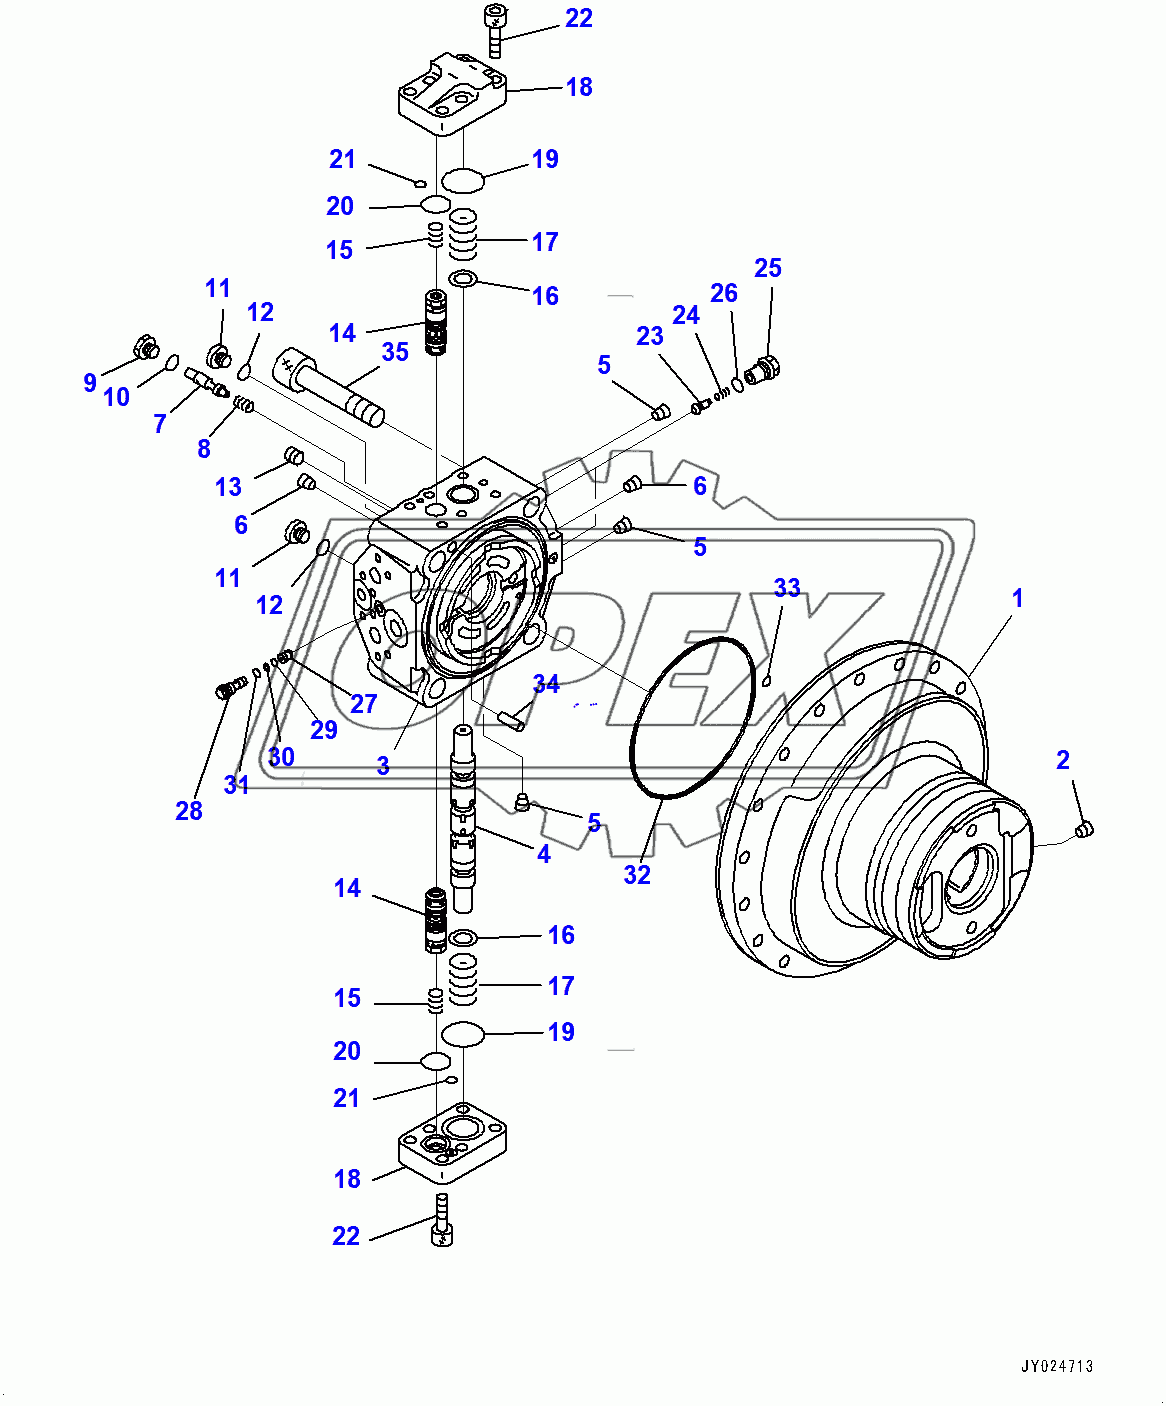  Travel Motor and Final Drive, Travel Motor, R.H. (1/2) (400127-)